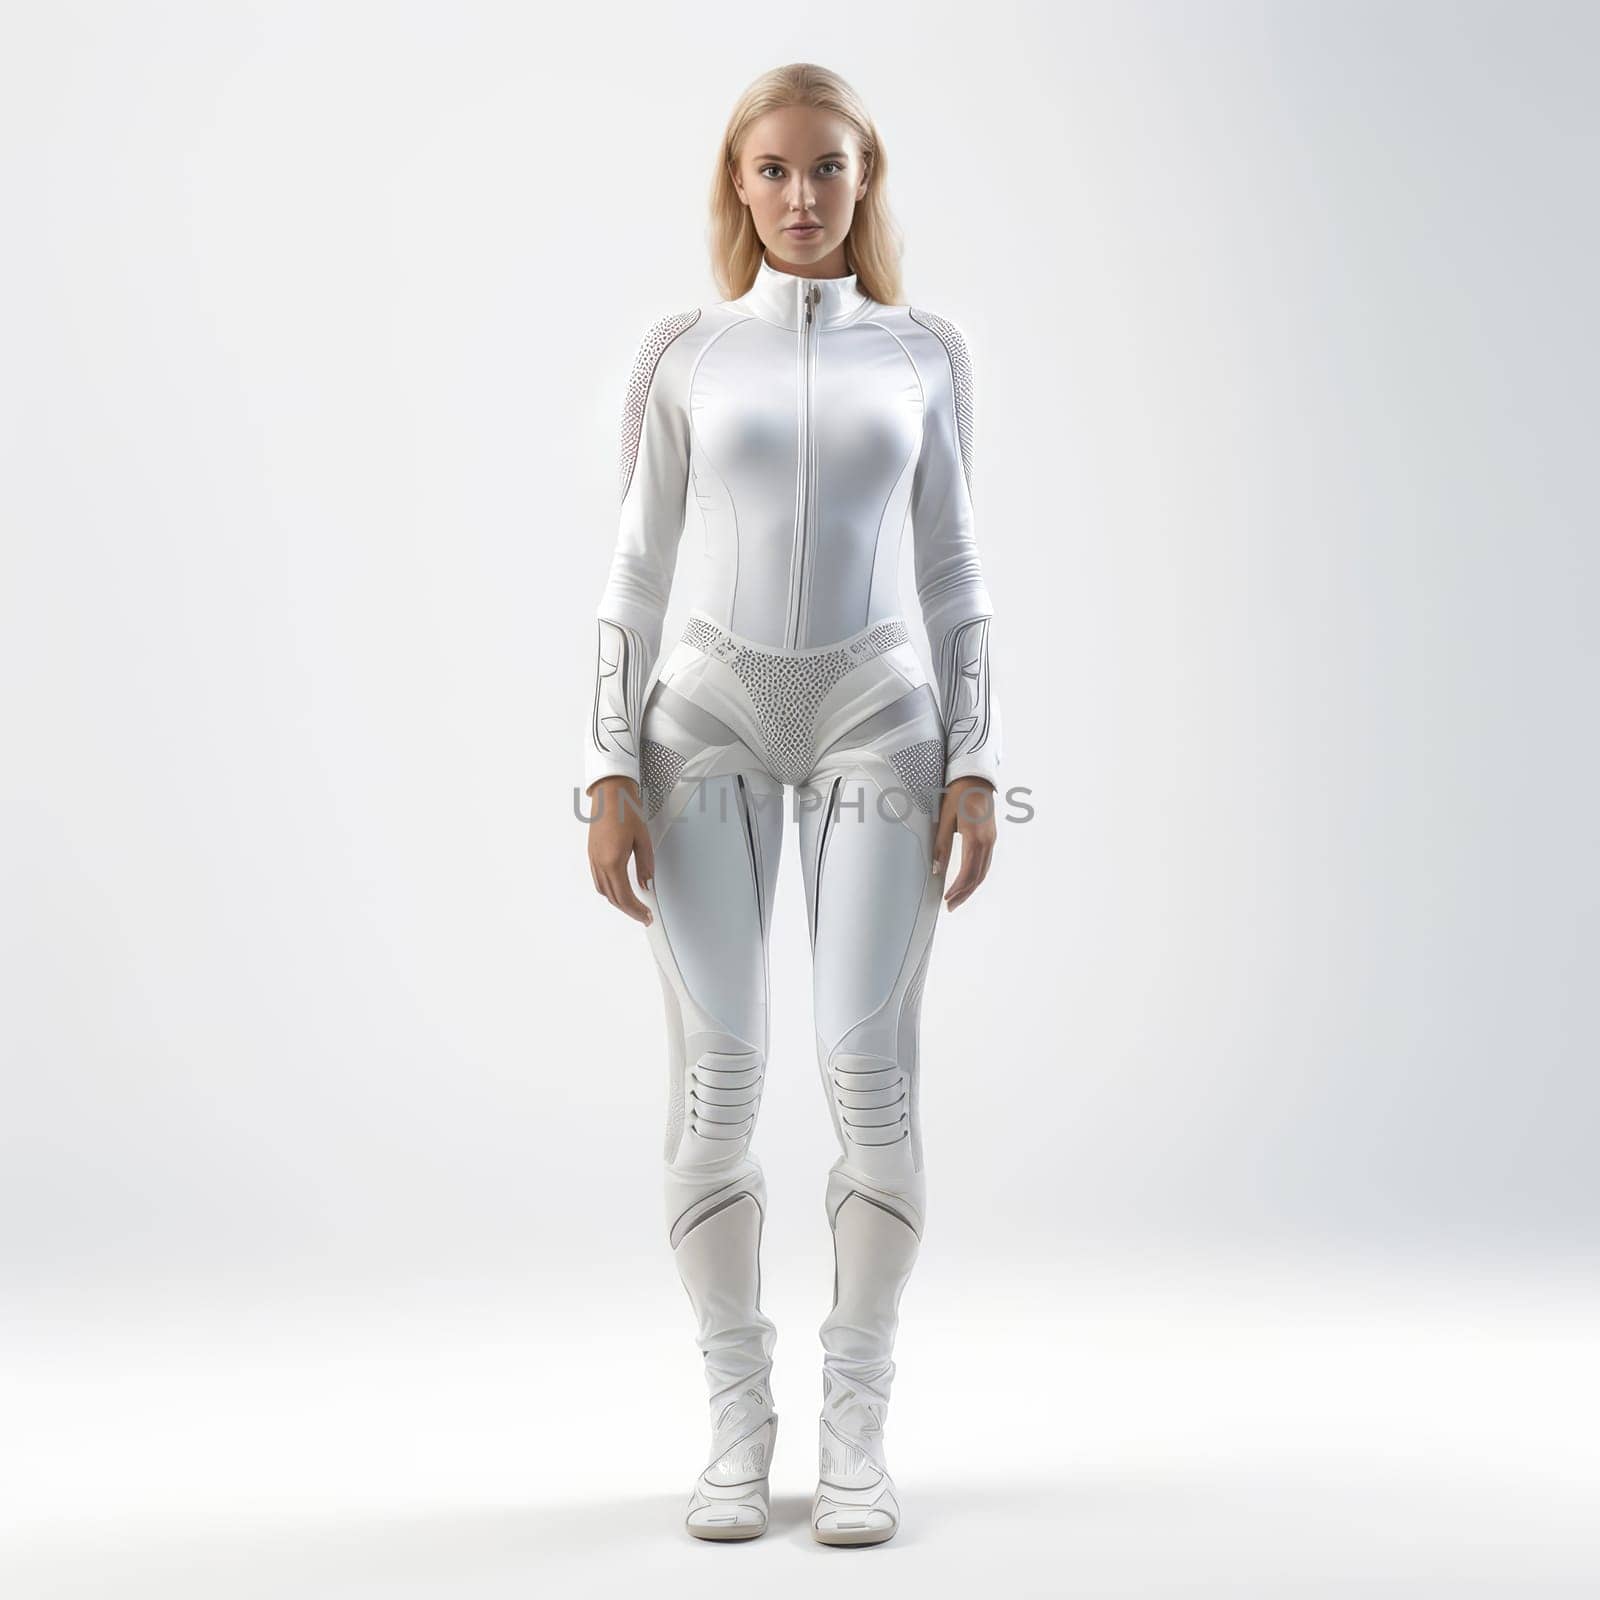 Young woman in clothes of the future on a white background. Fashion